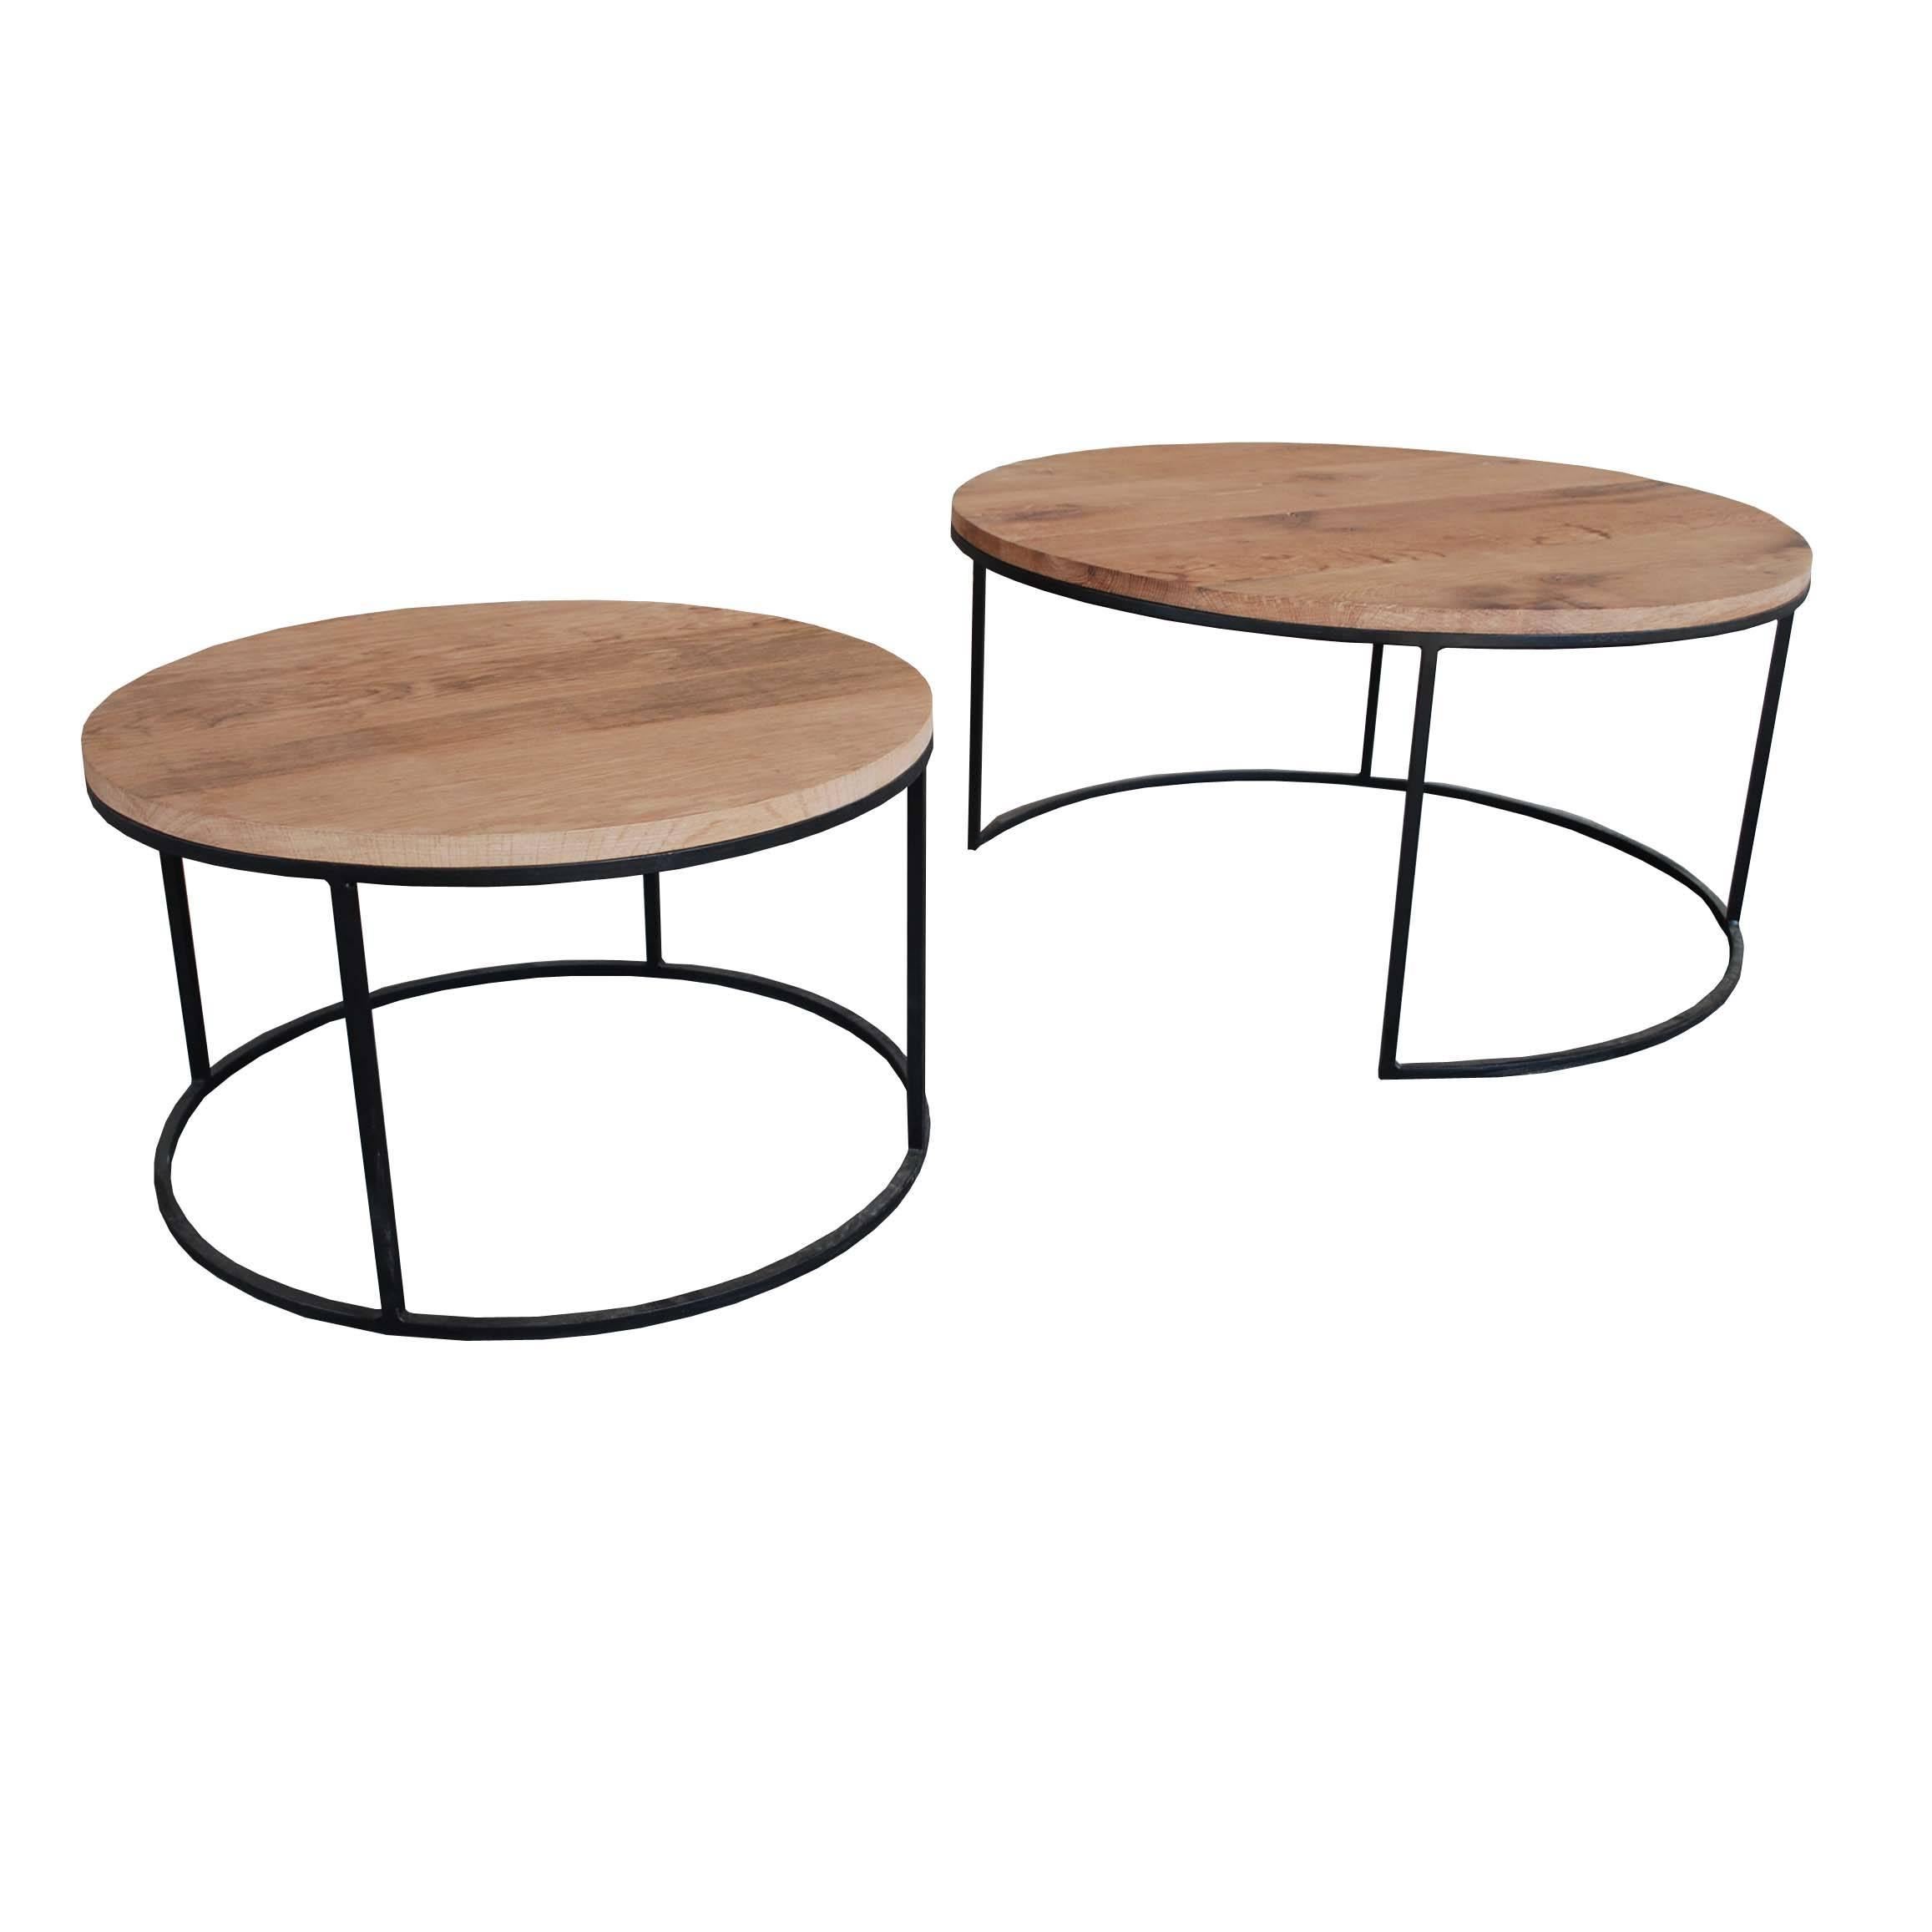 A set of two contemporary round coffeetables with solid aged oak top and solid steel base. 
The smaller table can be pushed under the larger one to create different settings.
The tops are made from aged French oak. This oakwood has undergone a